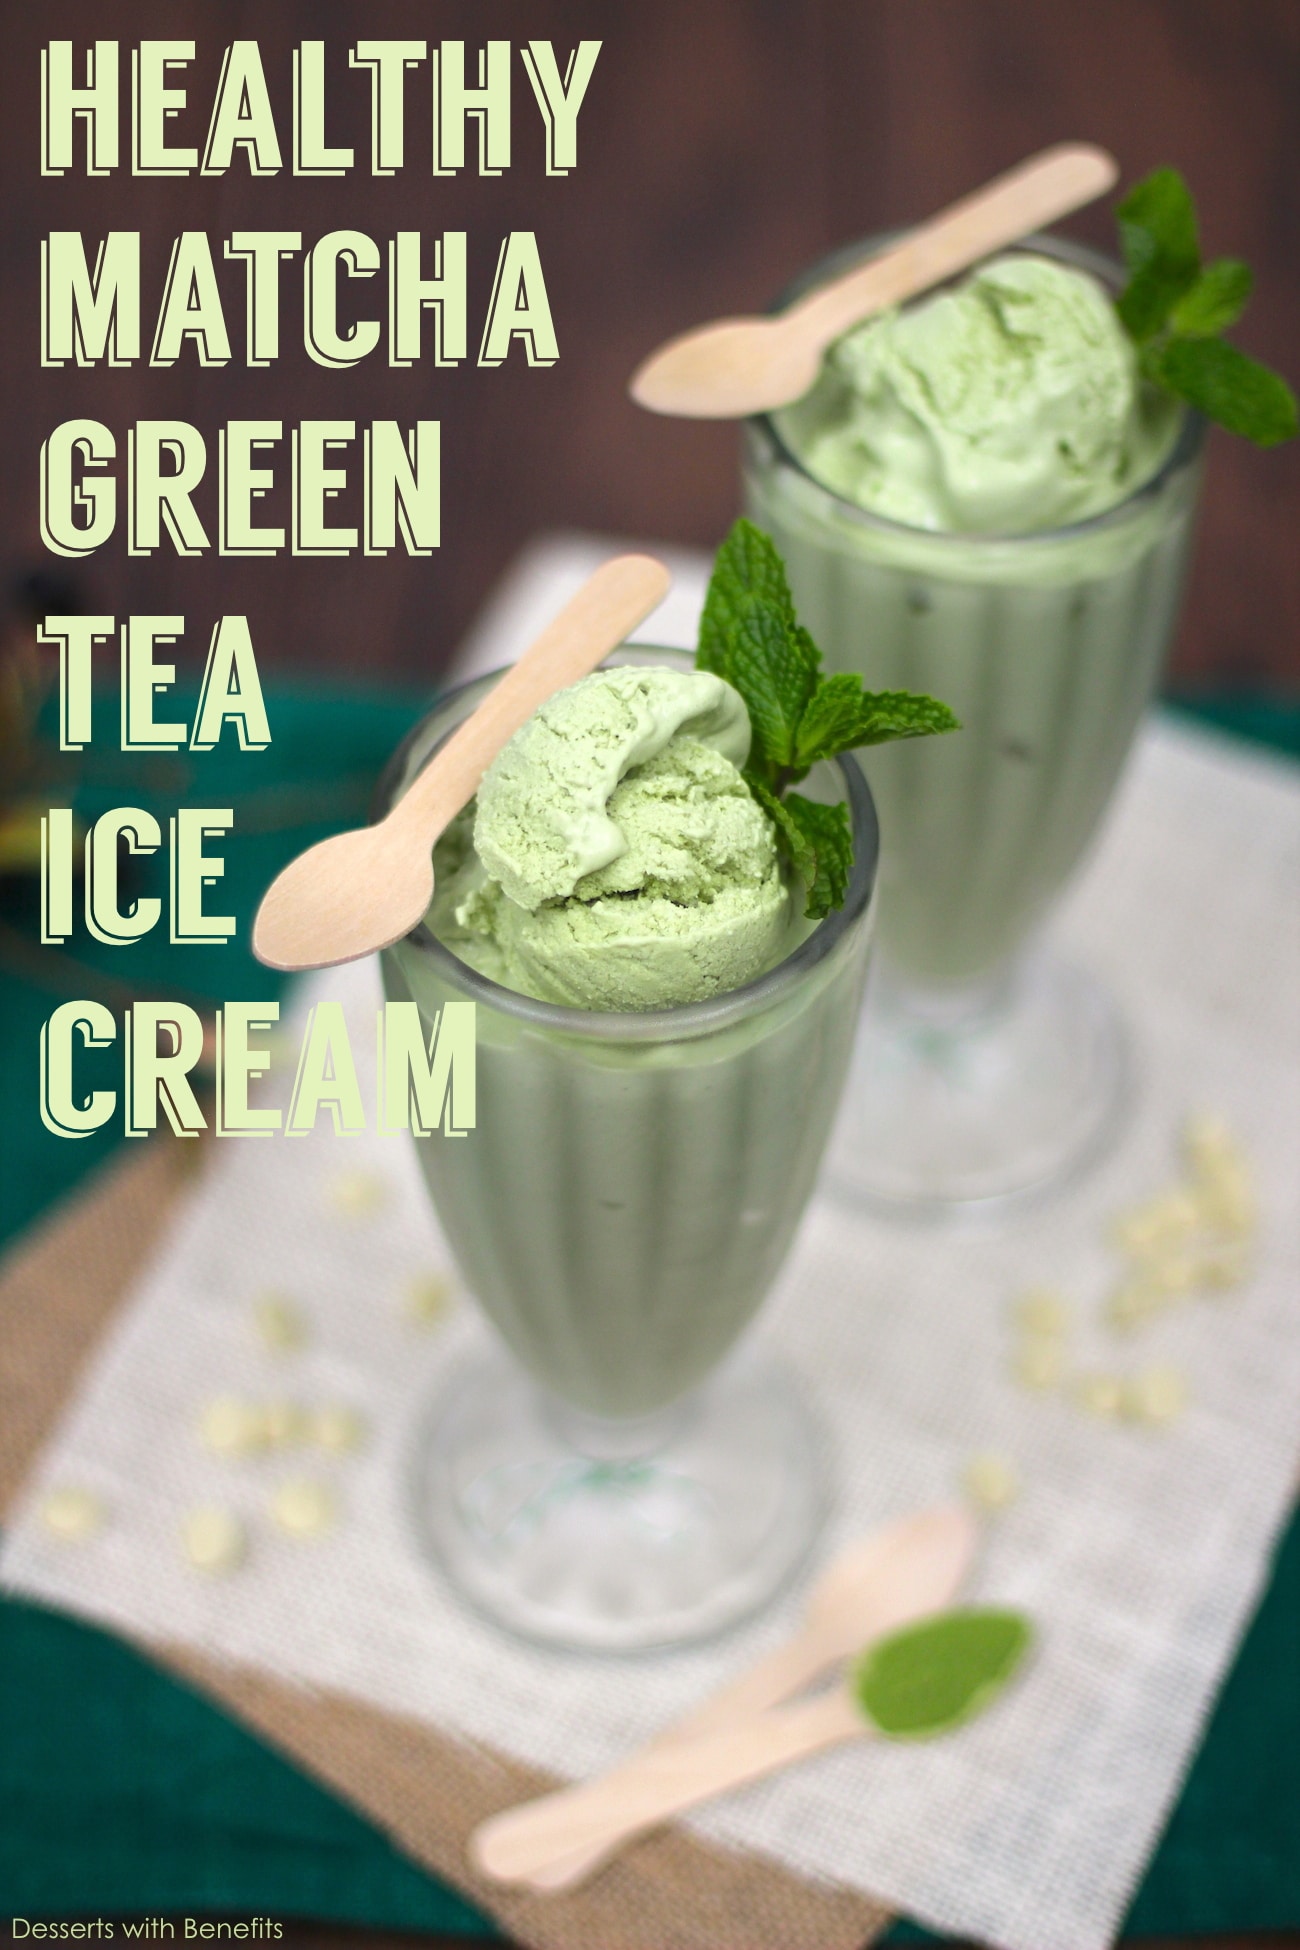 Healthy Matcha Green Tea Ice Cream recipe (refined sugar free, low carb, high protein, gluten free) - Healthy Dessert Recipes at Desserts with Benefits